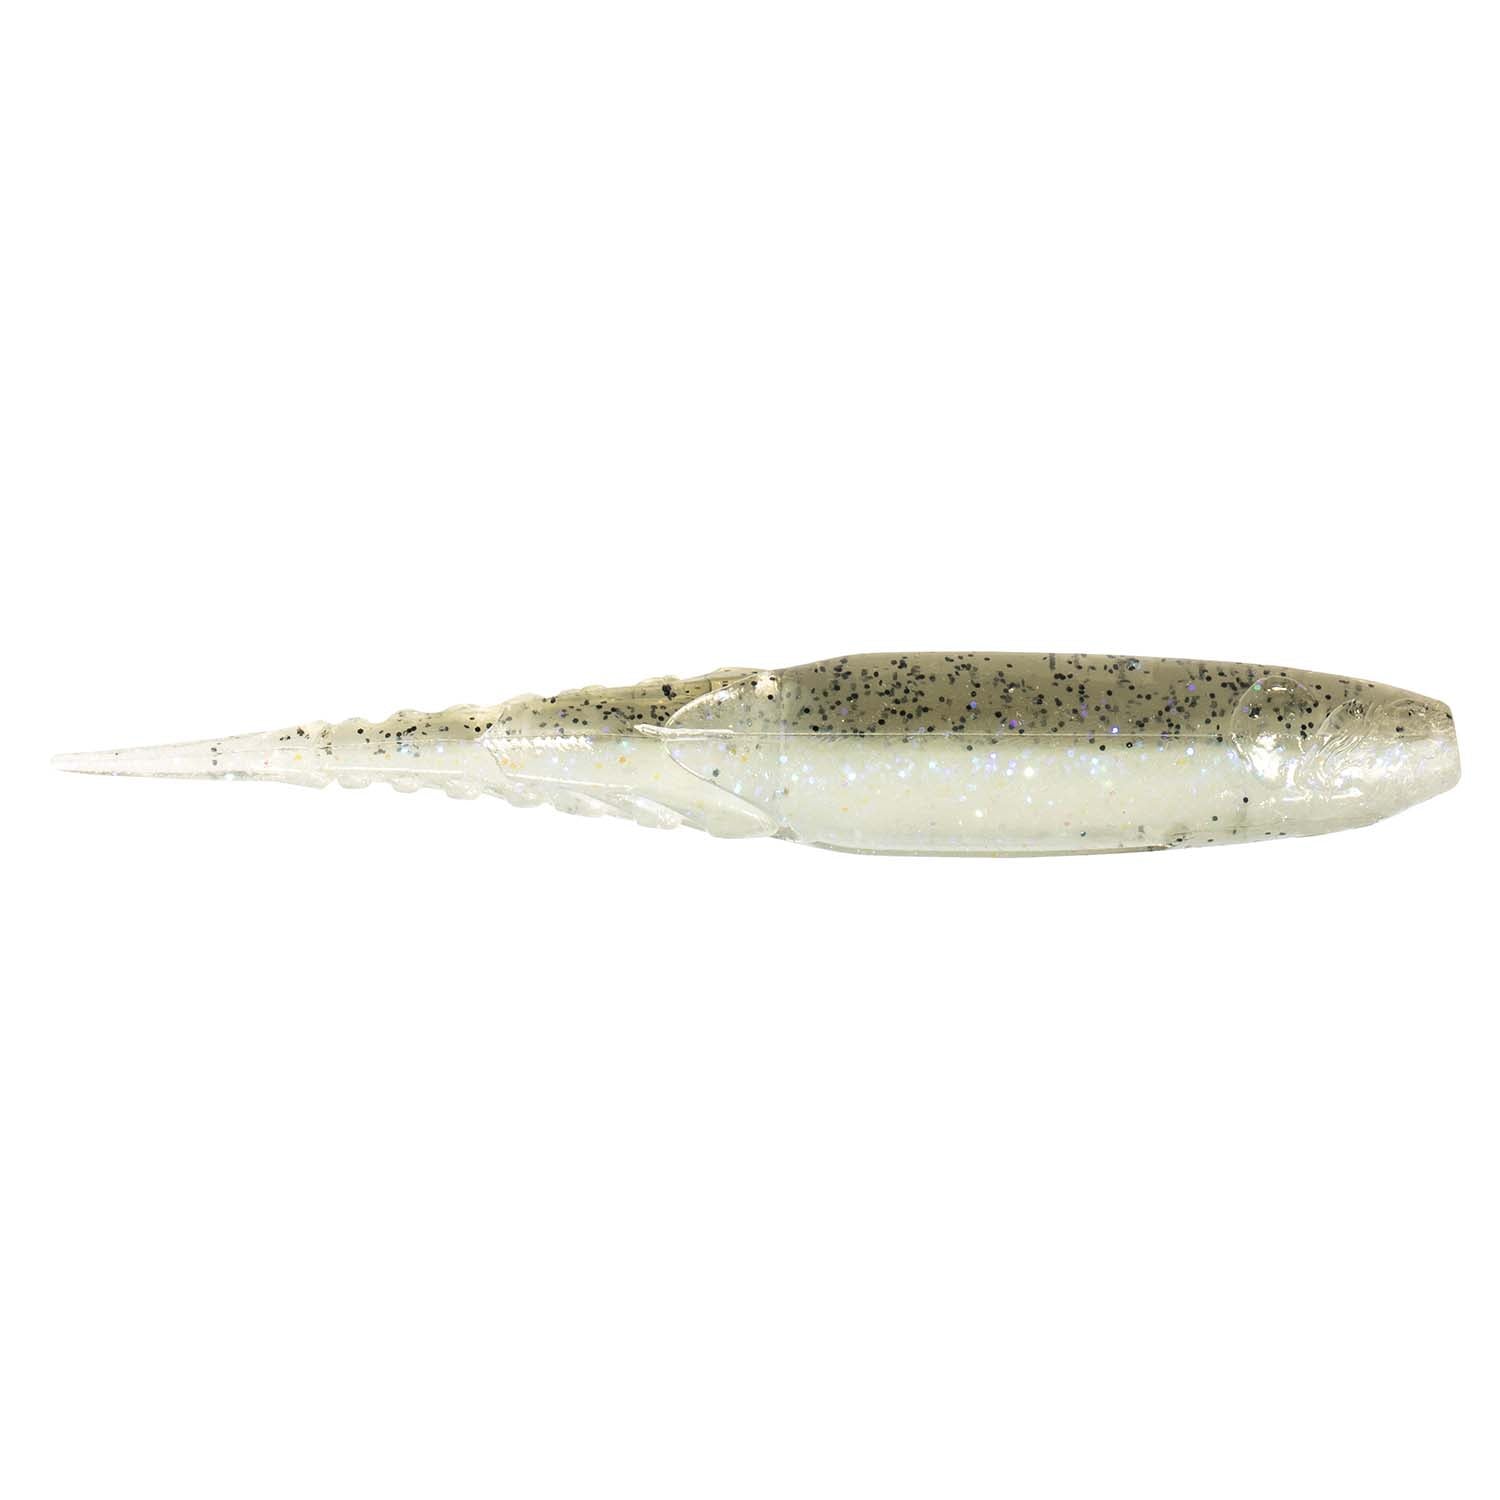 4.5 (5-pack) / Electric Shad